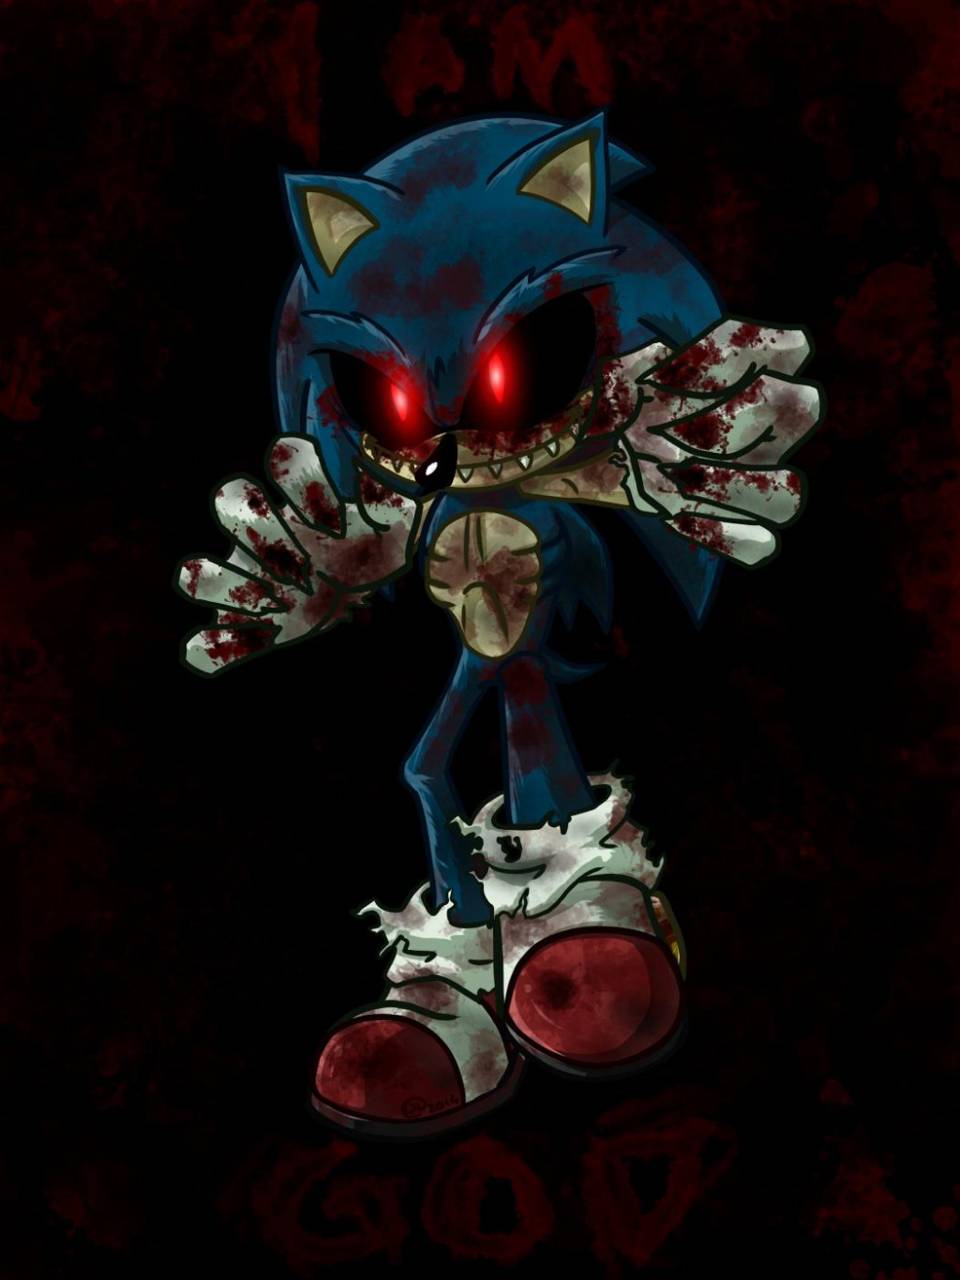 Sonic'exe Wallpapers 4K APK + Mod for Android.